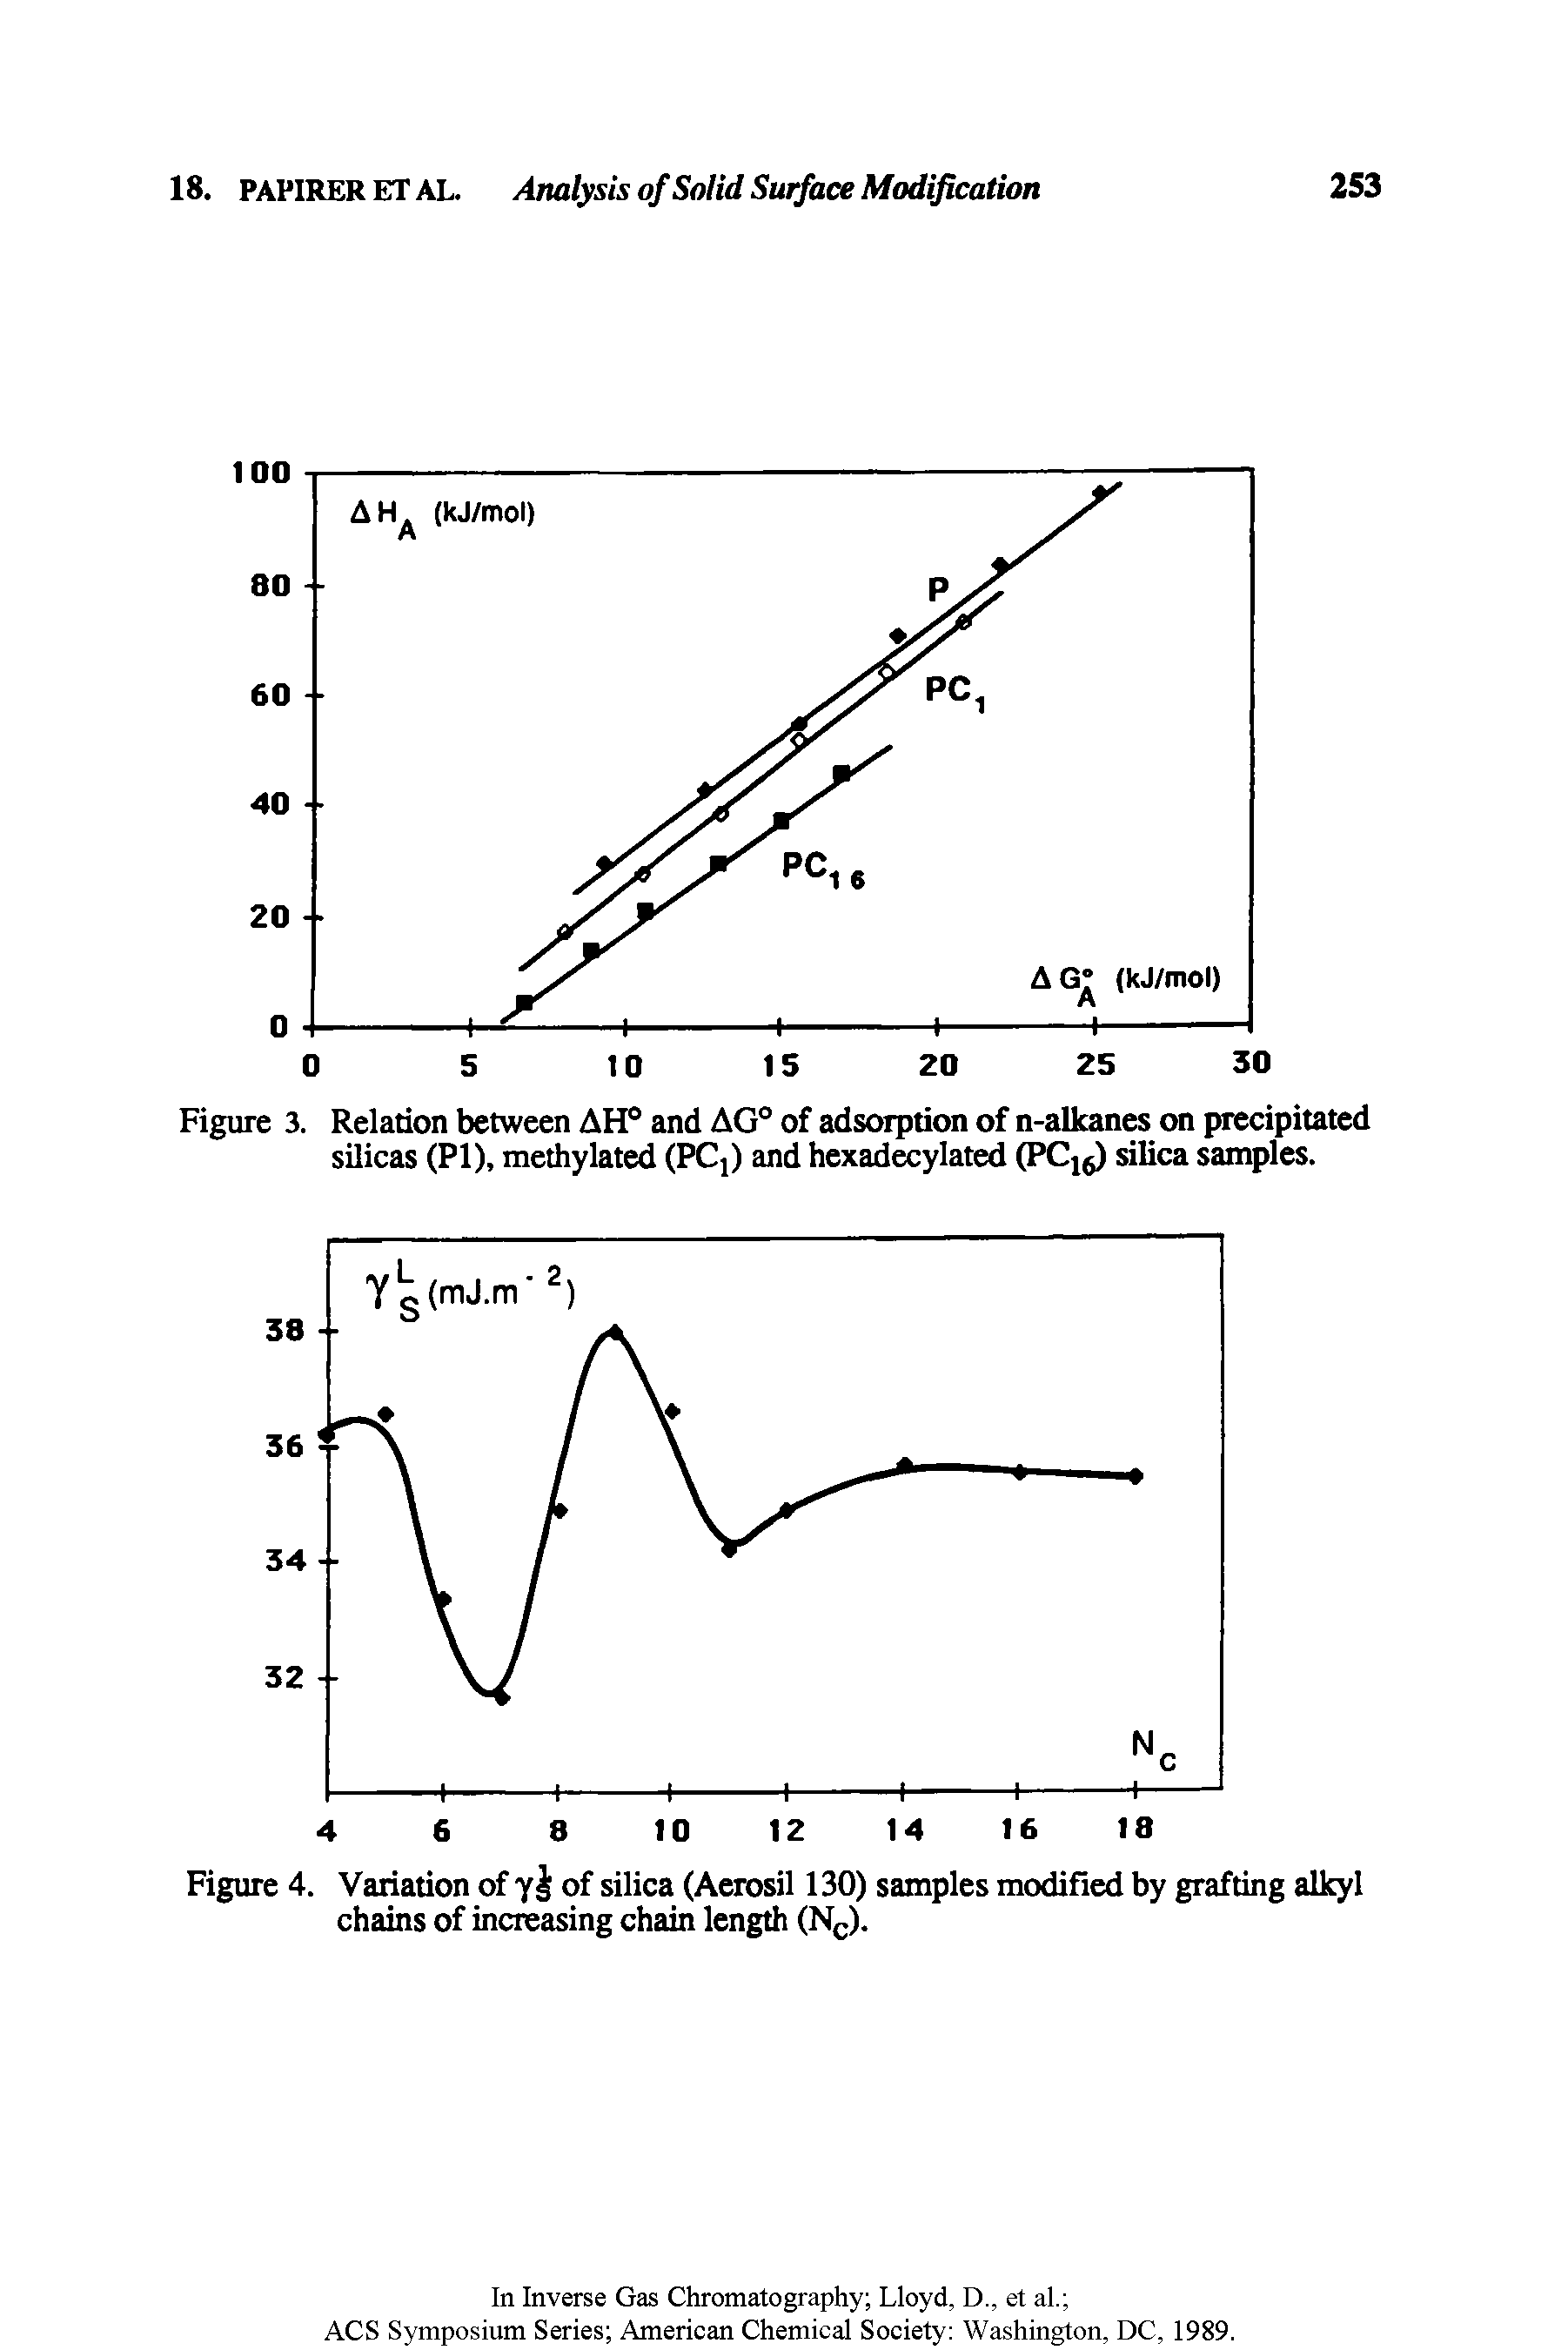 Figure 3. Relation between AH0 and AG° of adsorption of n-alkanes on precipitated silicas (PI), methylated (PC ) and hexadecylated (PC16) silica samples.